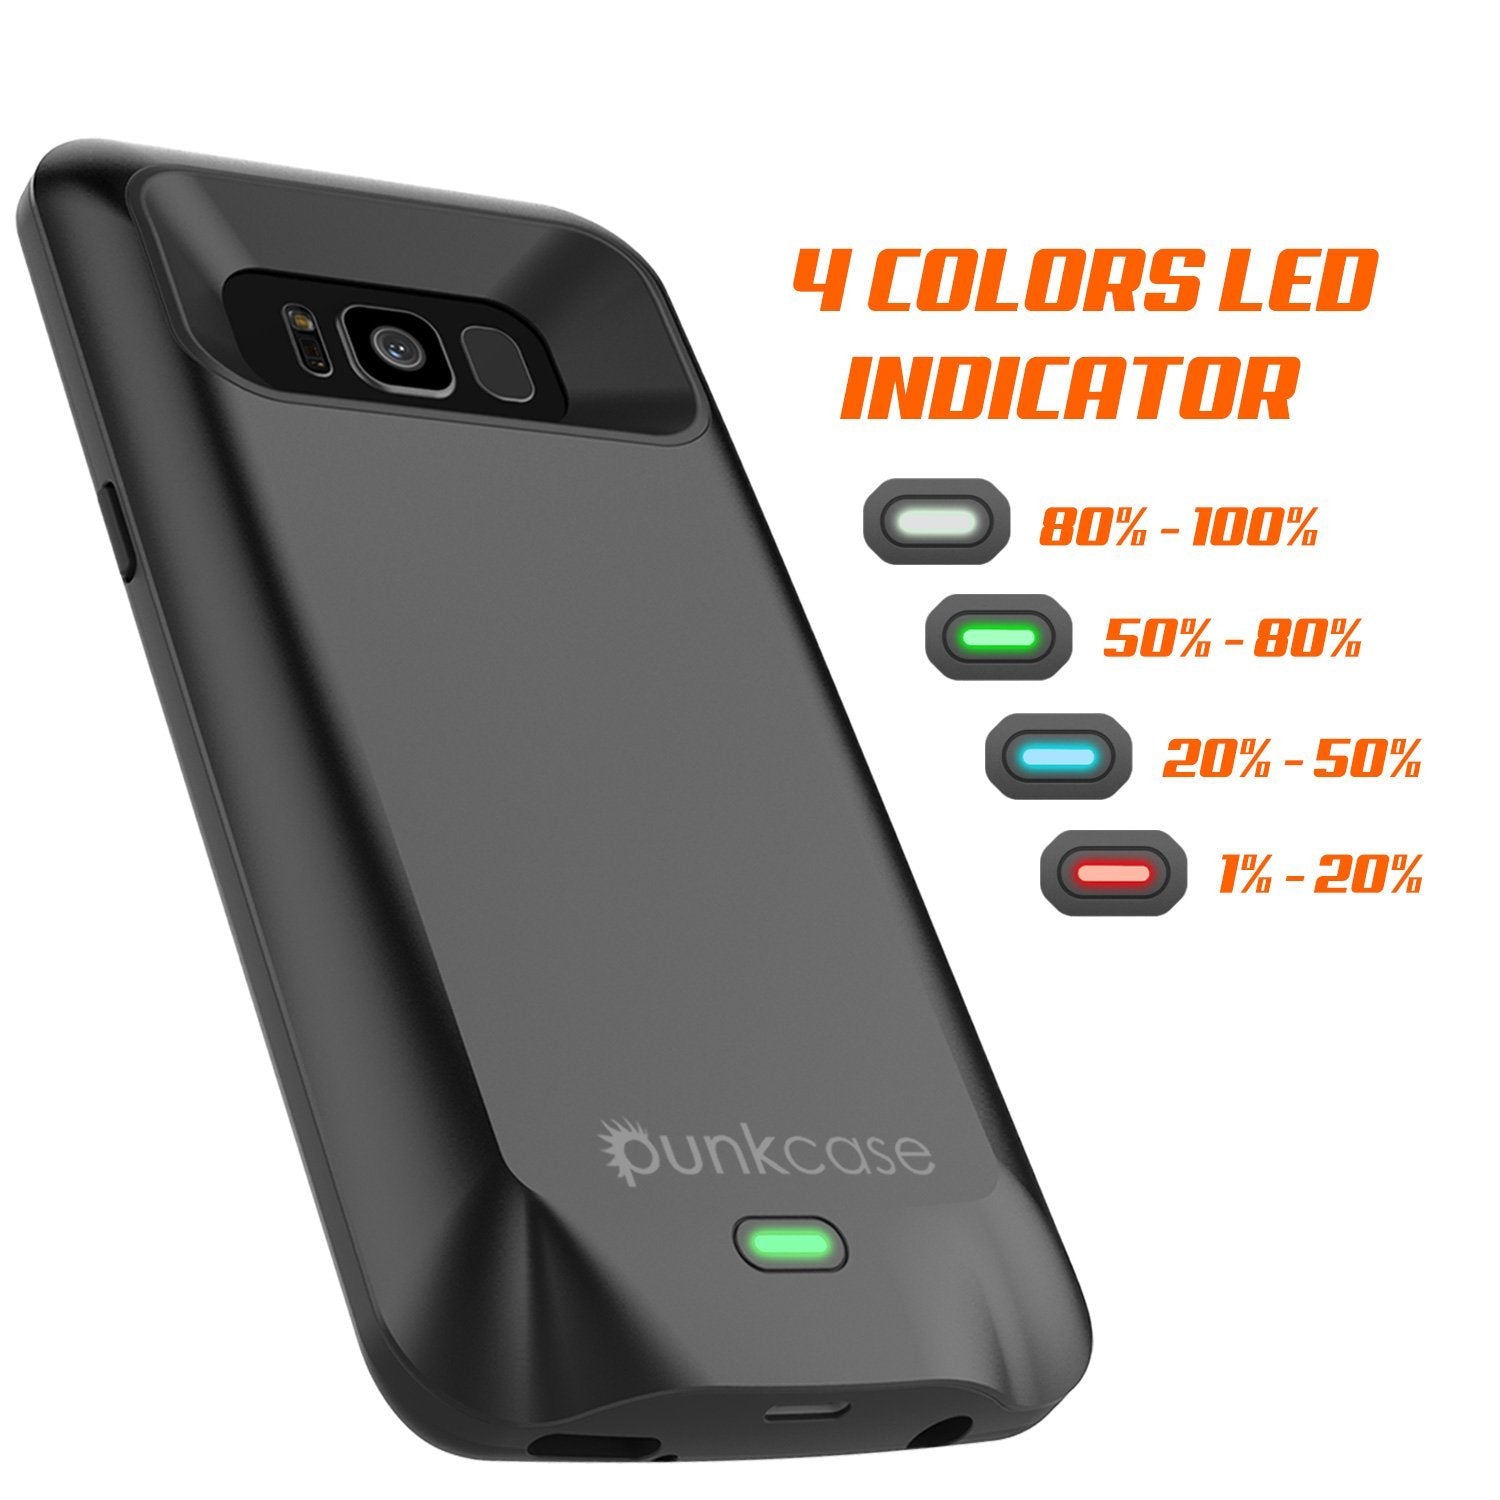 Galaxy S8 Battery Case, Punkcase 5000mAH Charger Black Case